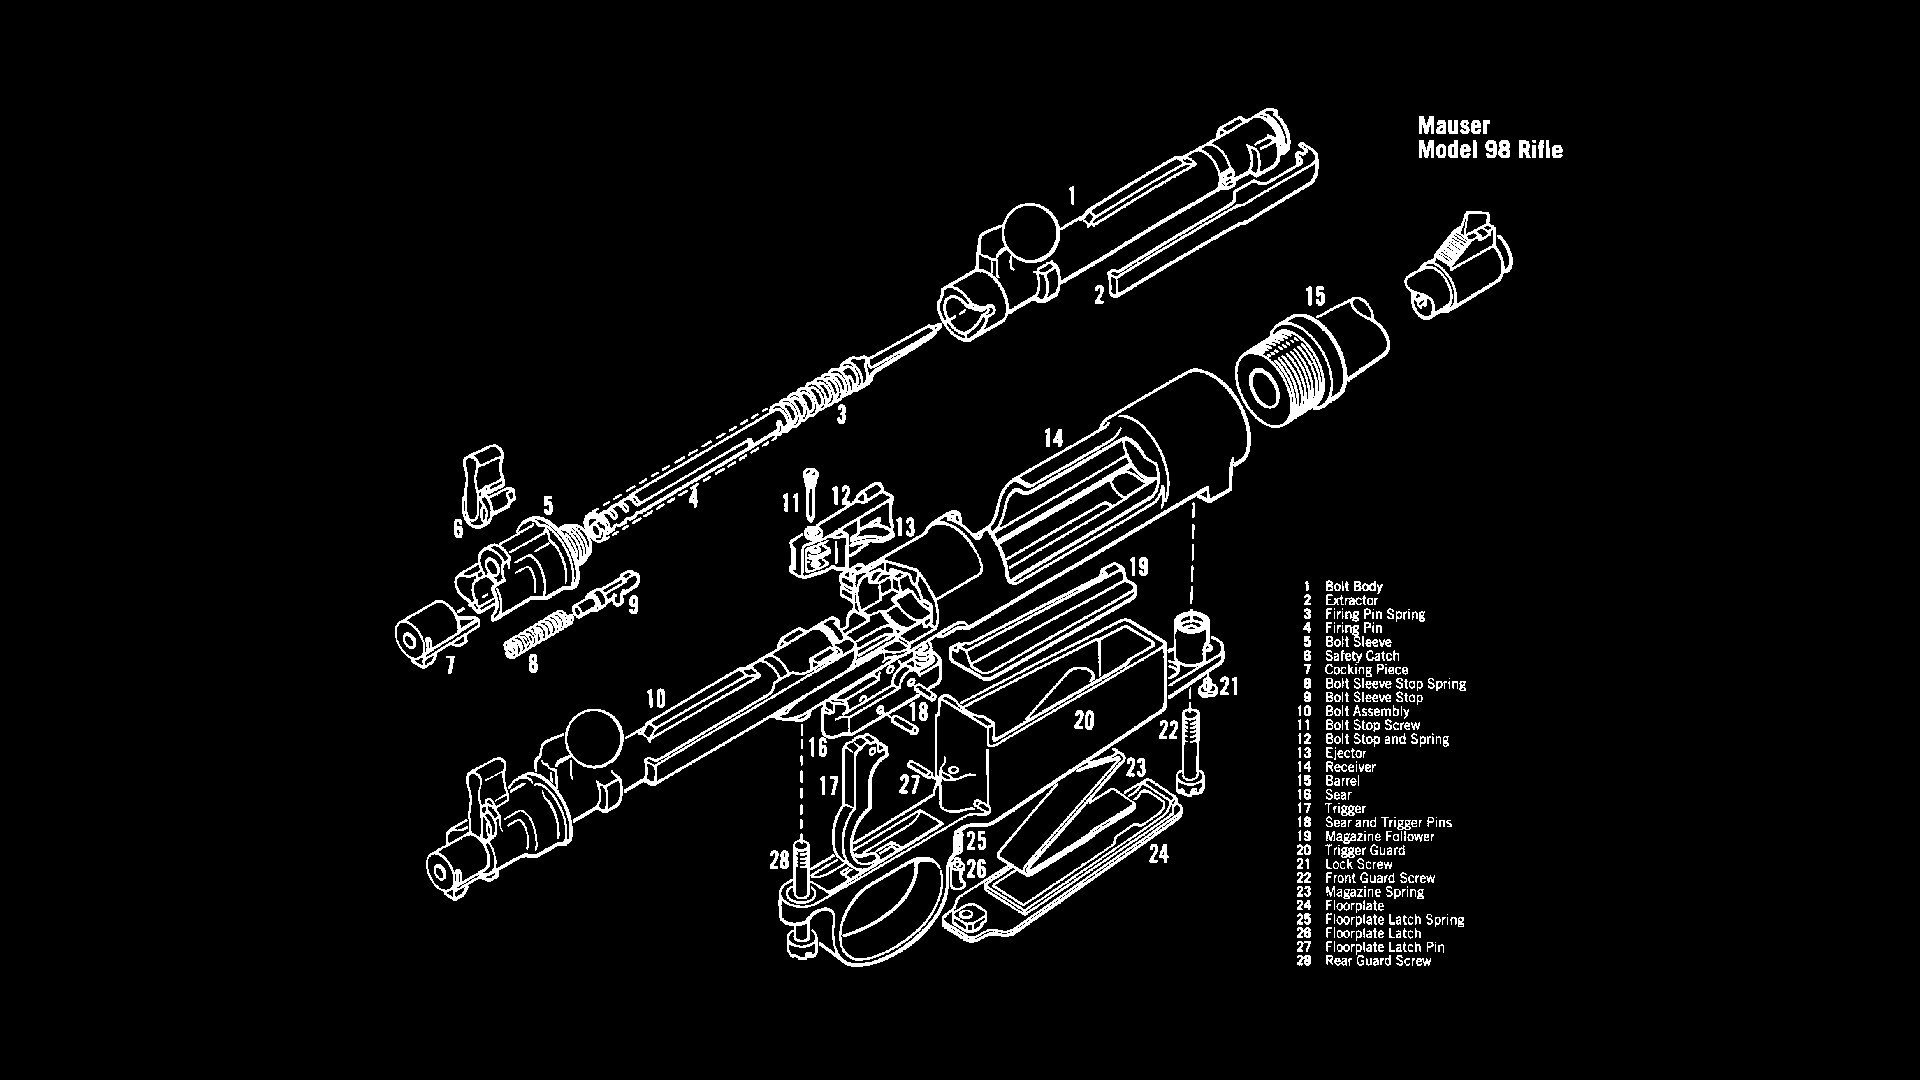 gun, Exploded view diagram, Mauser Wallpapers HD / Desktop and Mobile